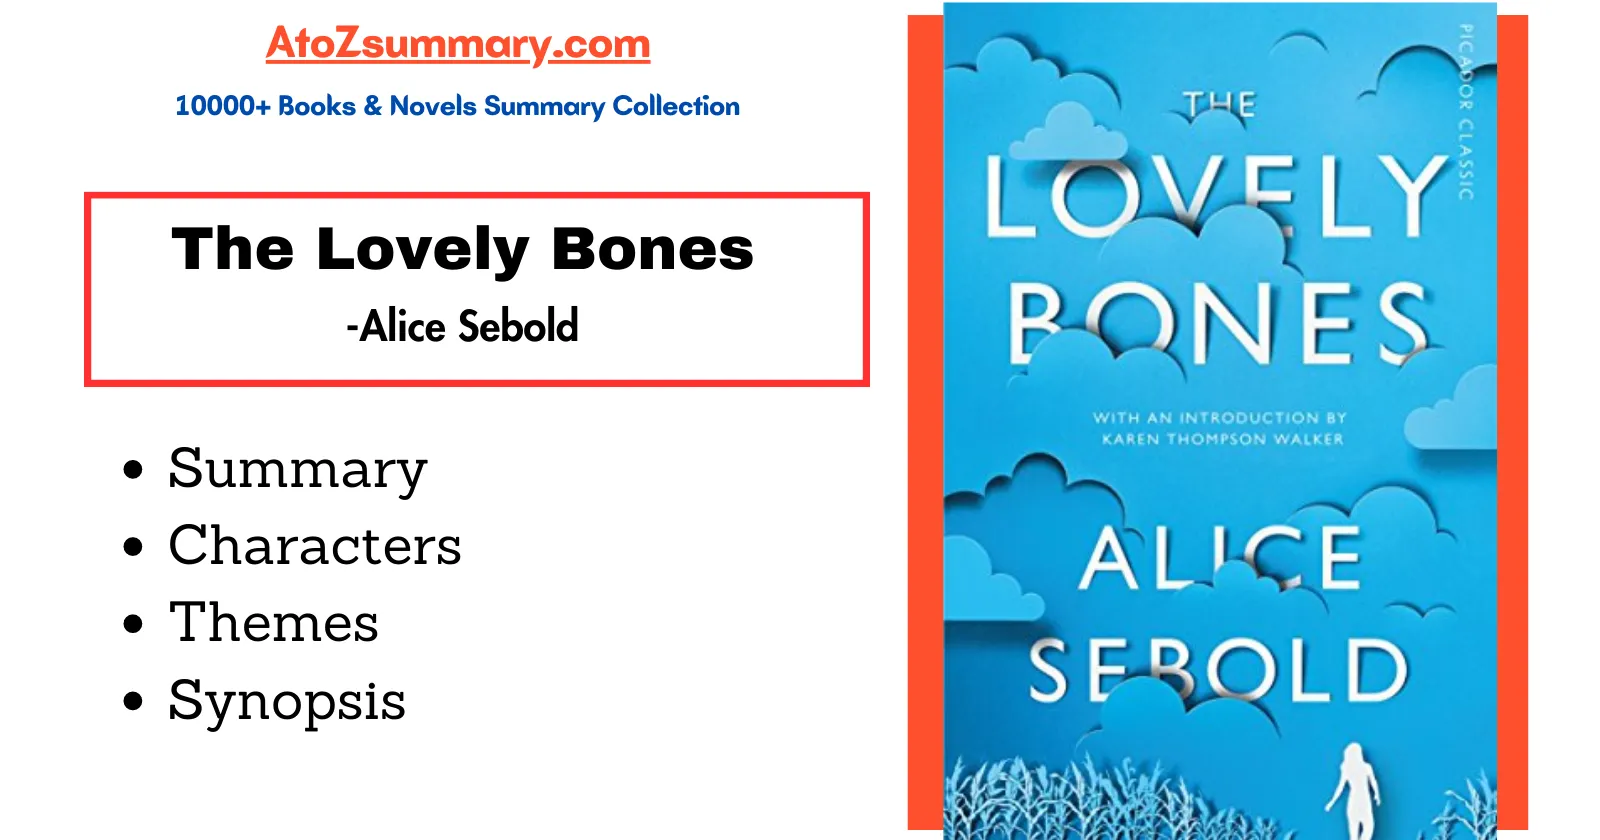 The Lovely Bones Summary, Themes, Characters & Synopsis by Alice Sebold